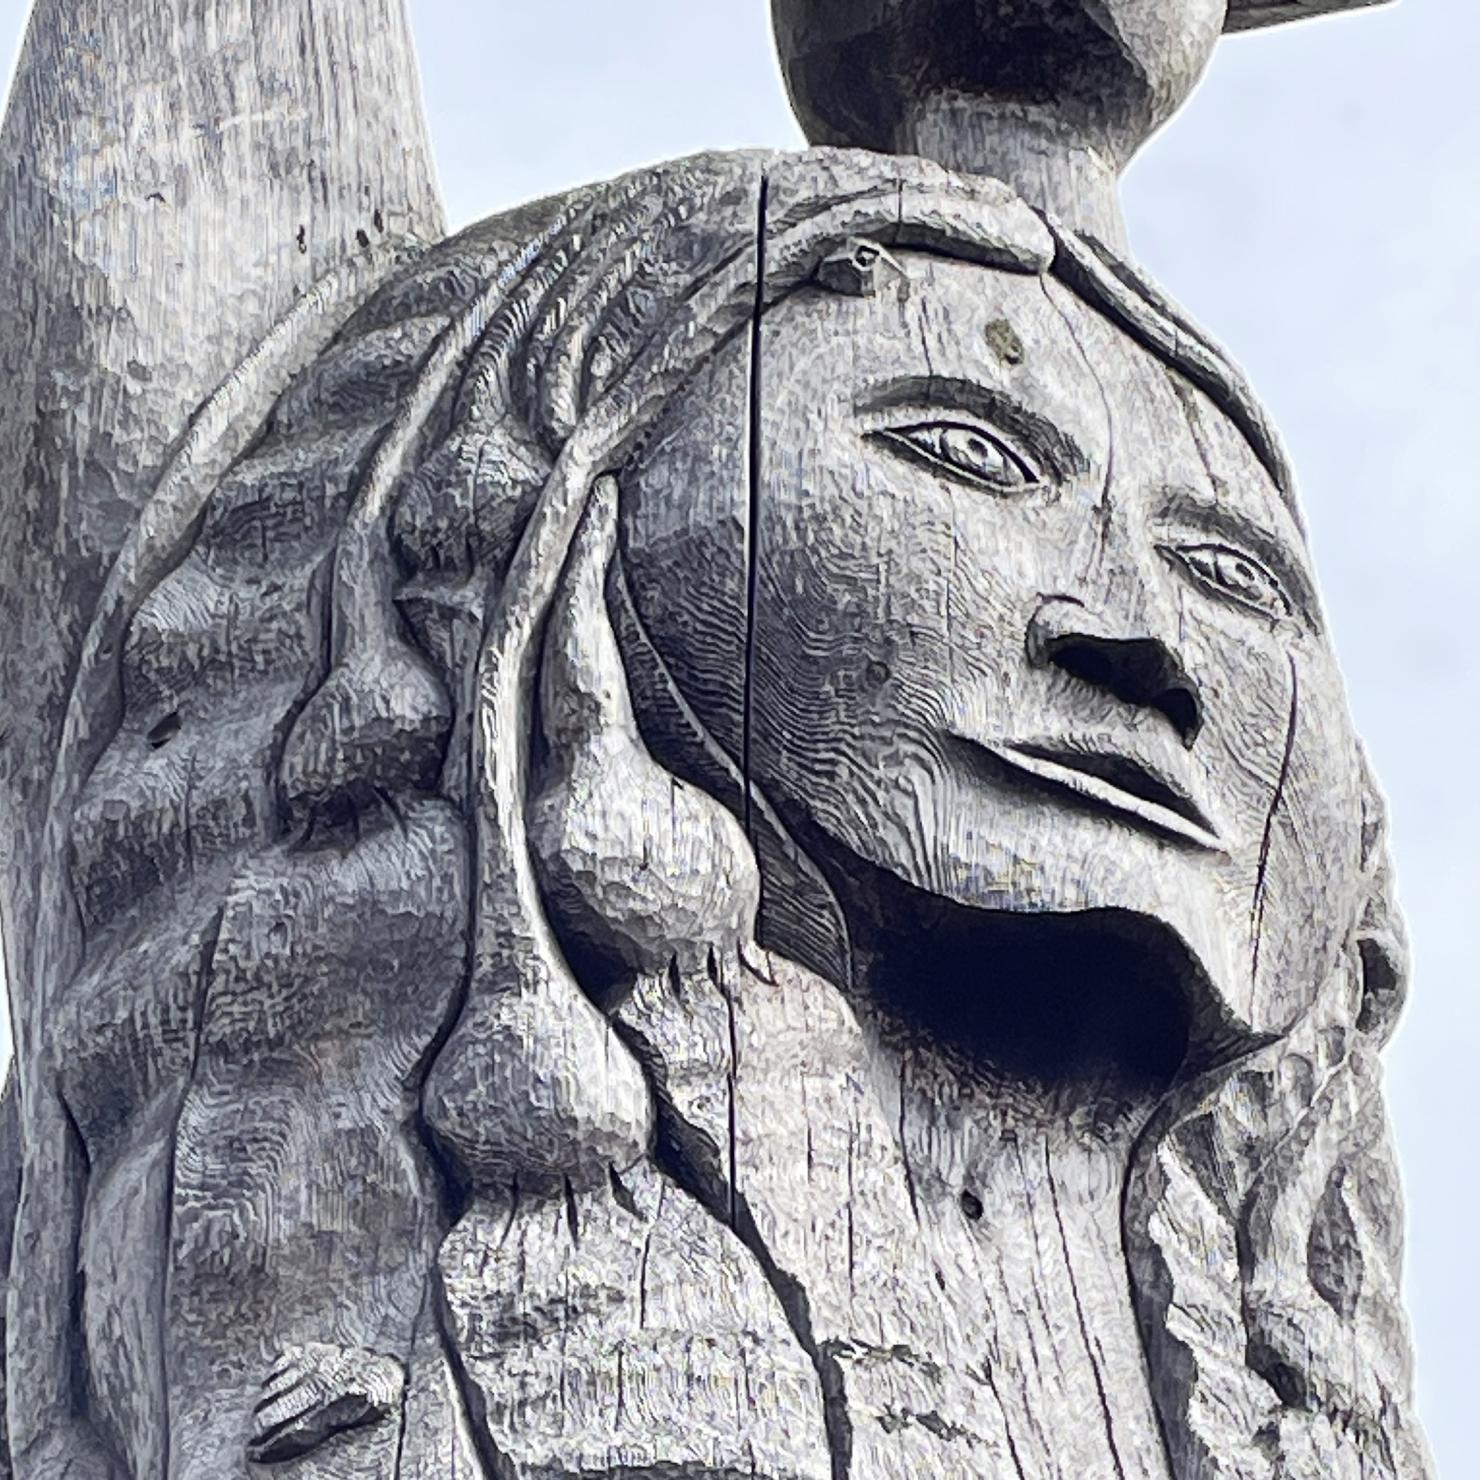 The Maiden of Deception Pass